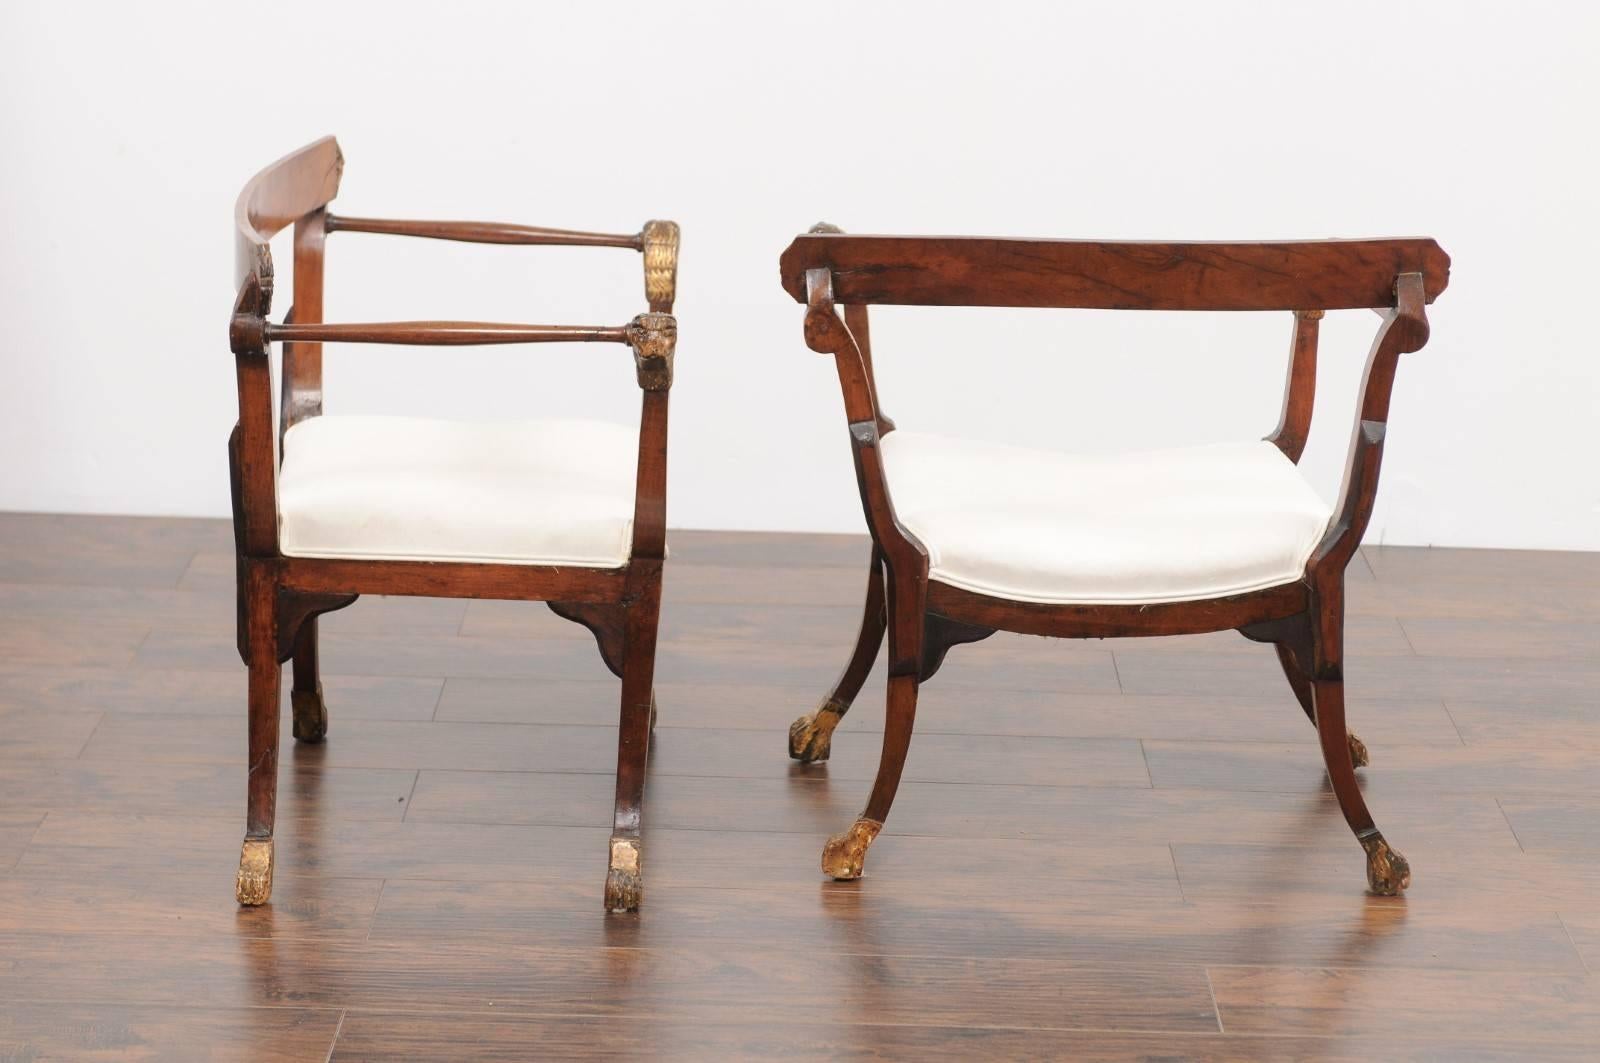 Pair of 18th Century Italian Upholstered Seat Walnut Chairs with Lion Details 4